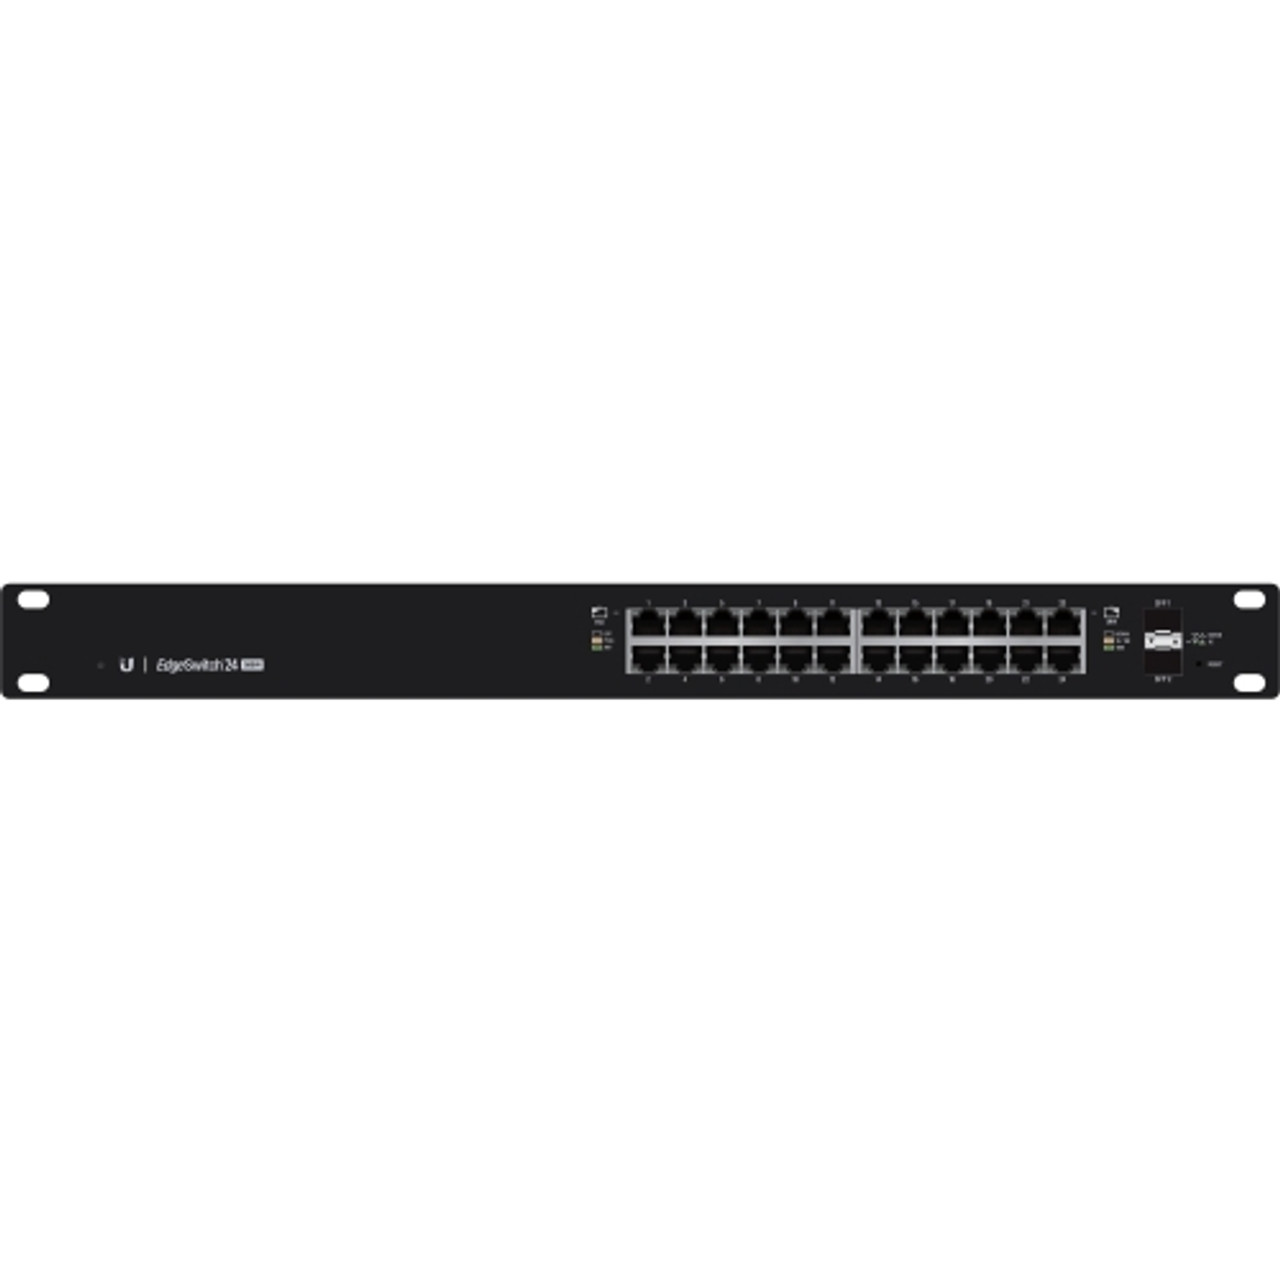 ES-24-500W Ubiquiti Networks EdgeSwitch 24-Ports SFP Layer 3 Gigabit Ethernet Layer 3 Switch Manageable 3 Layer Supported 1U High Rack-mountable (Refurbished)